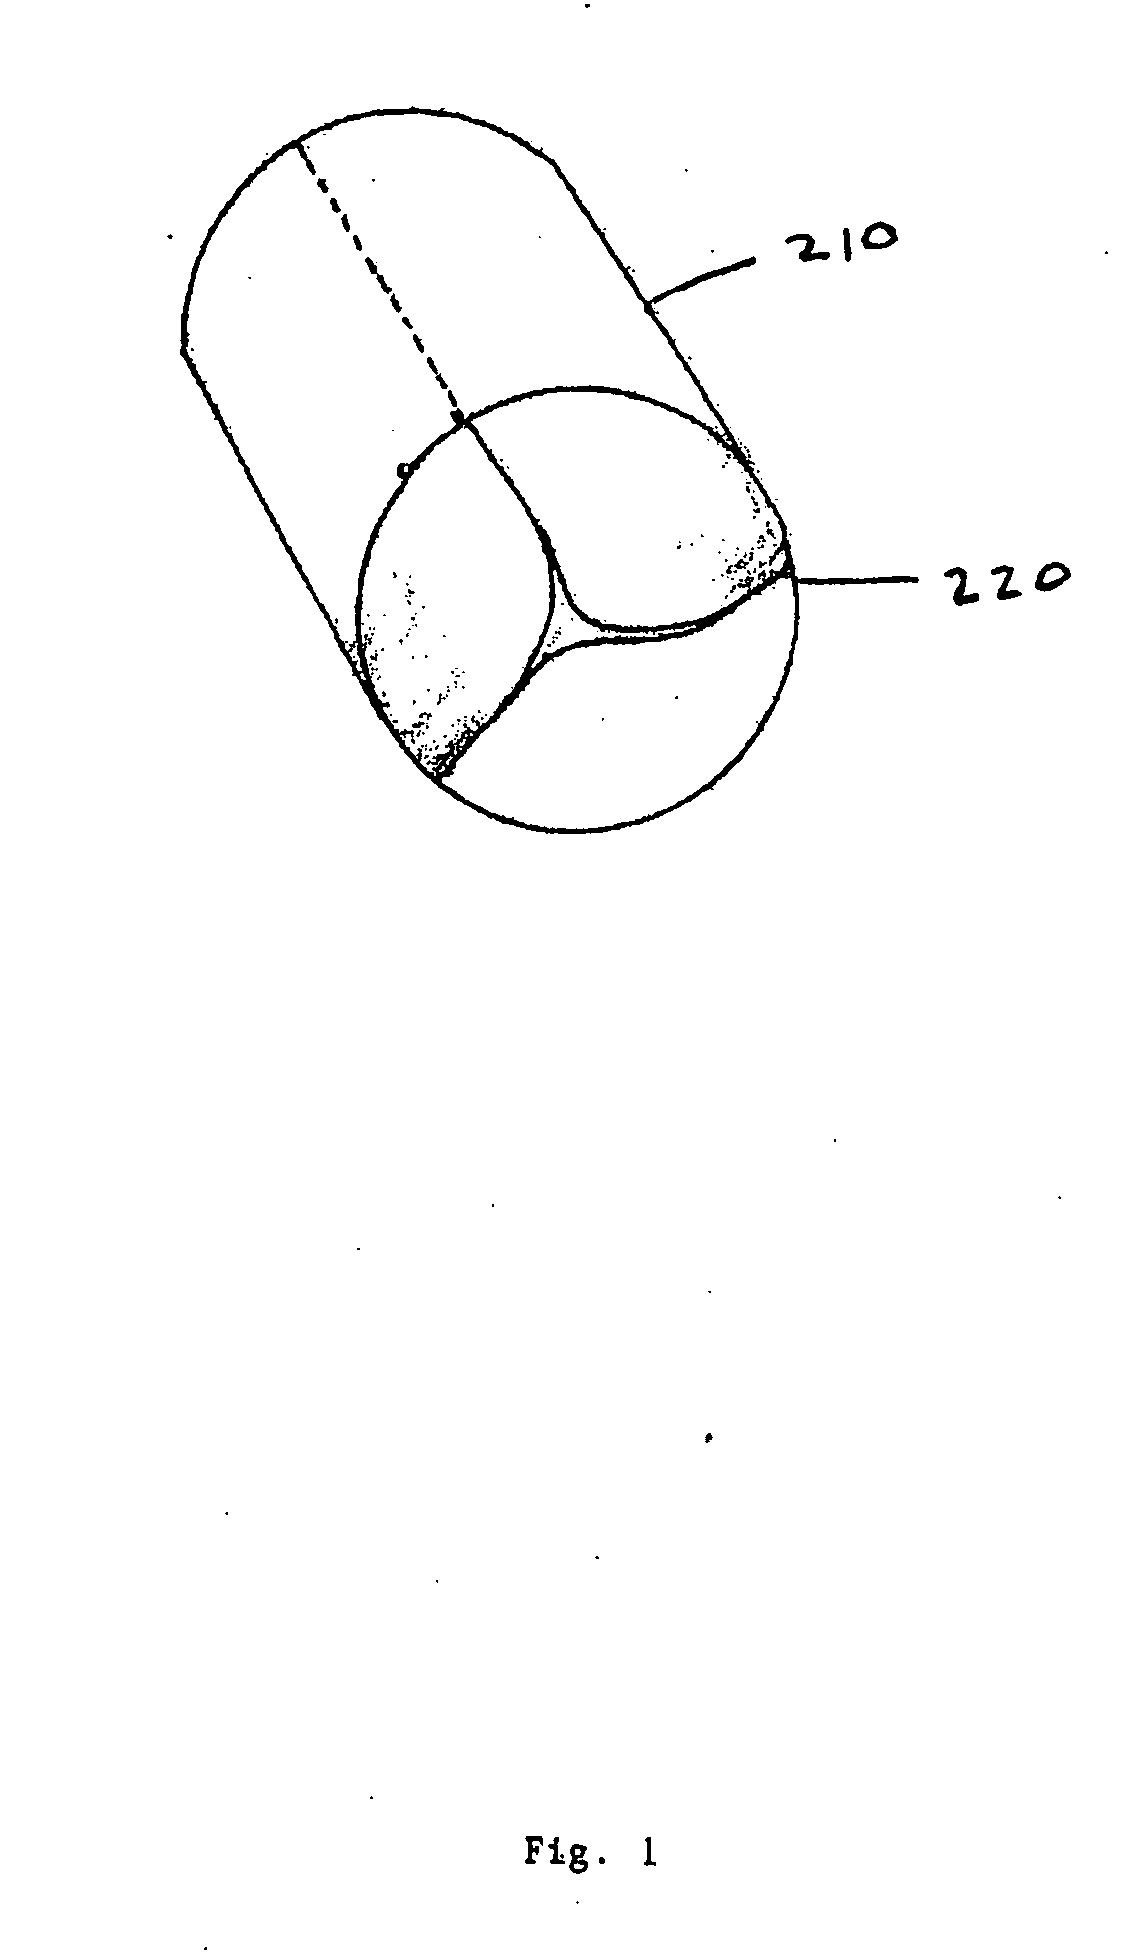 Percutaneously implantable replacement heart valve device and method of making same